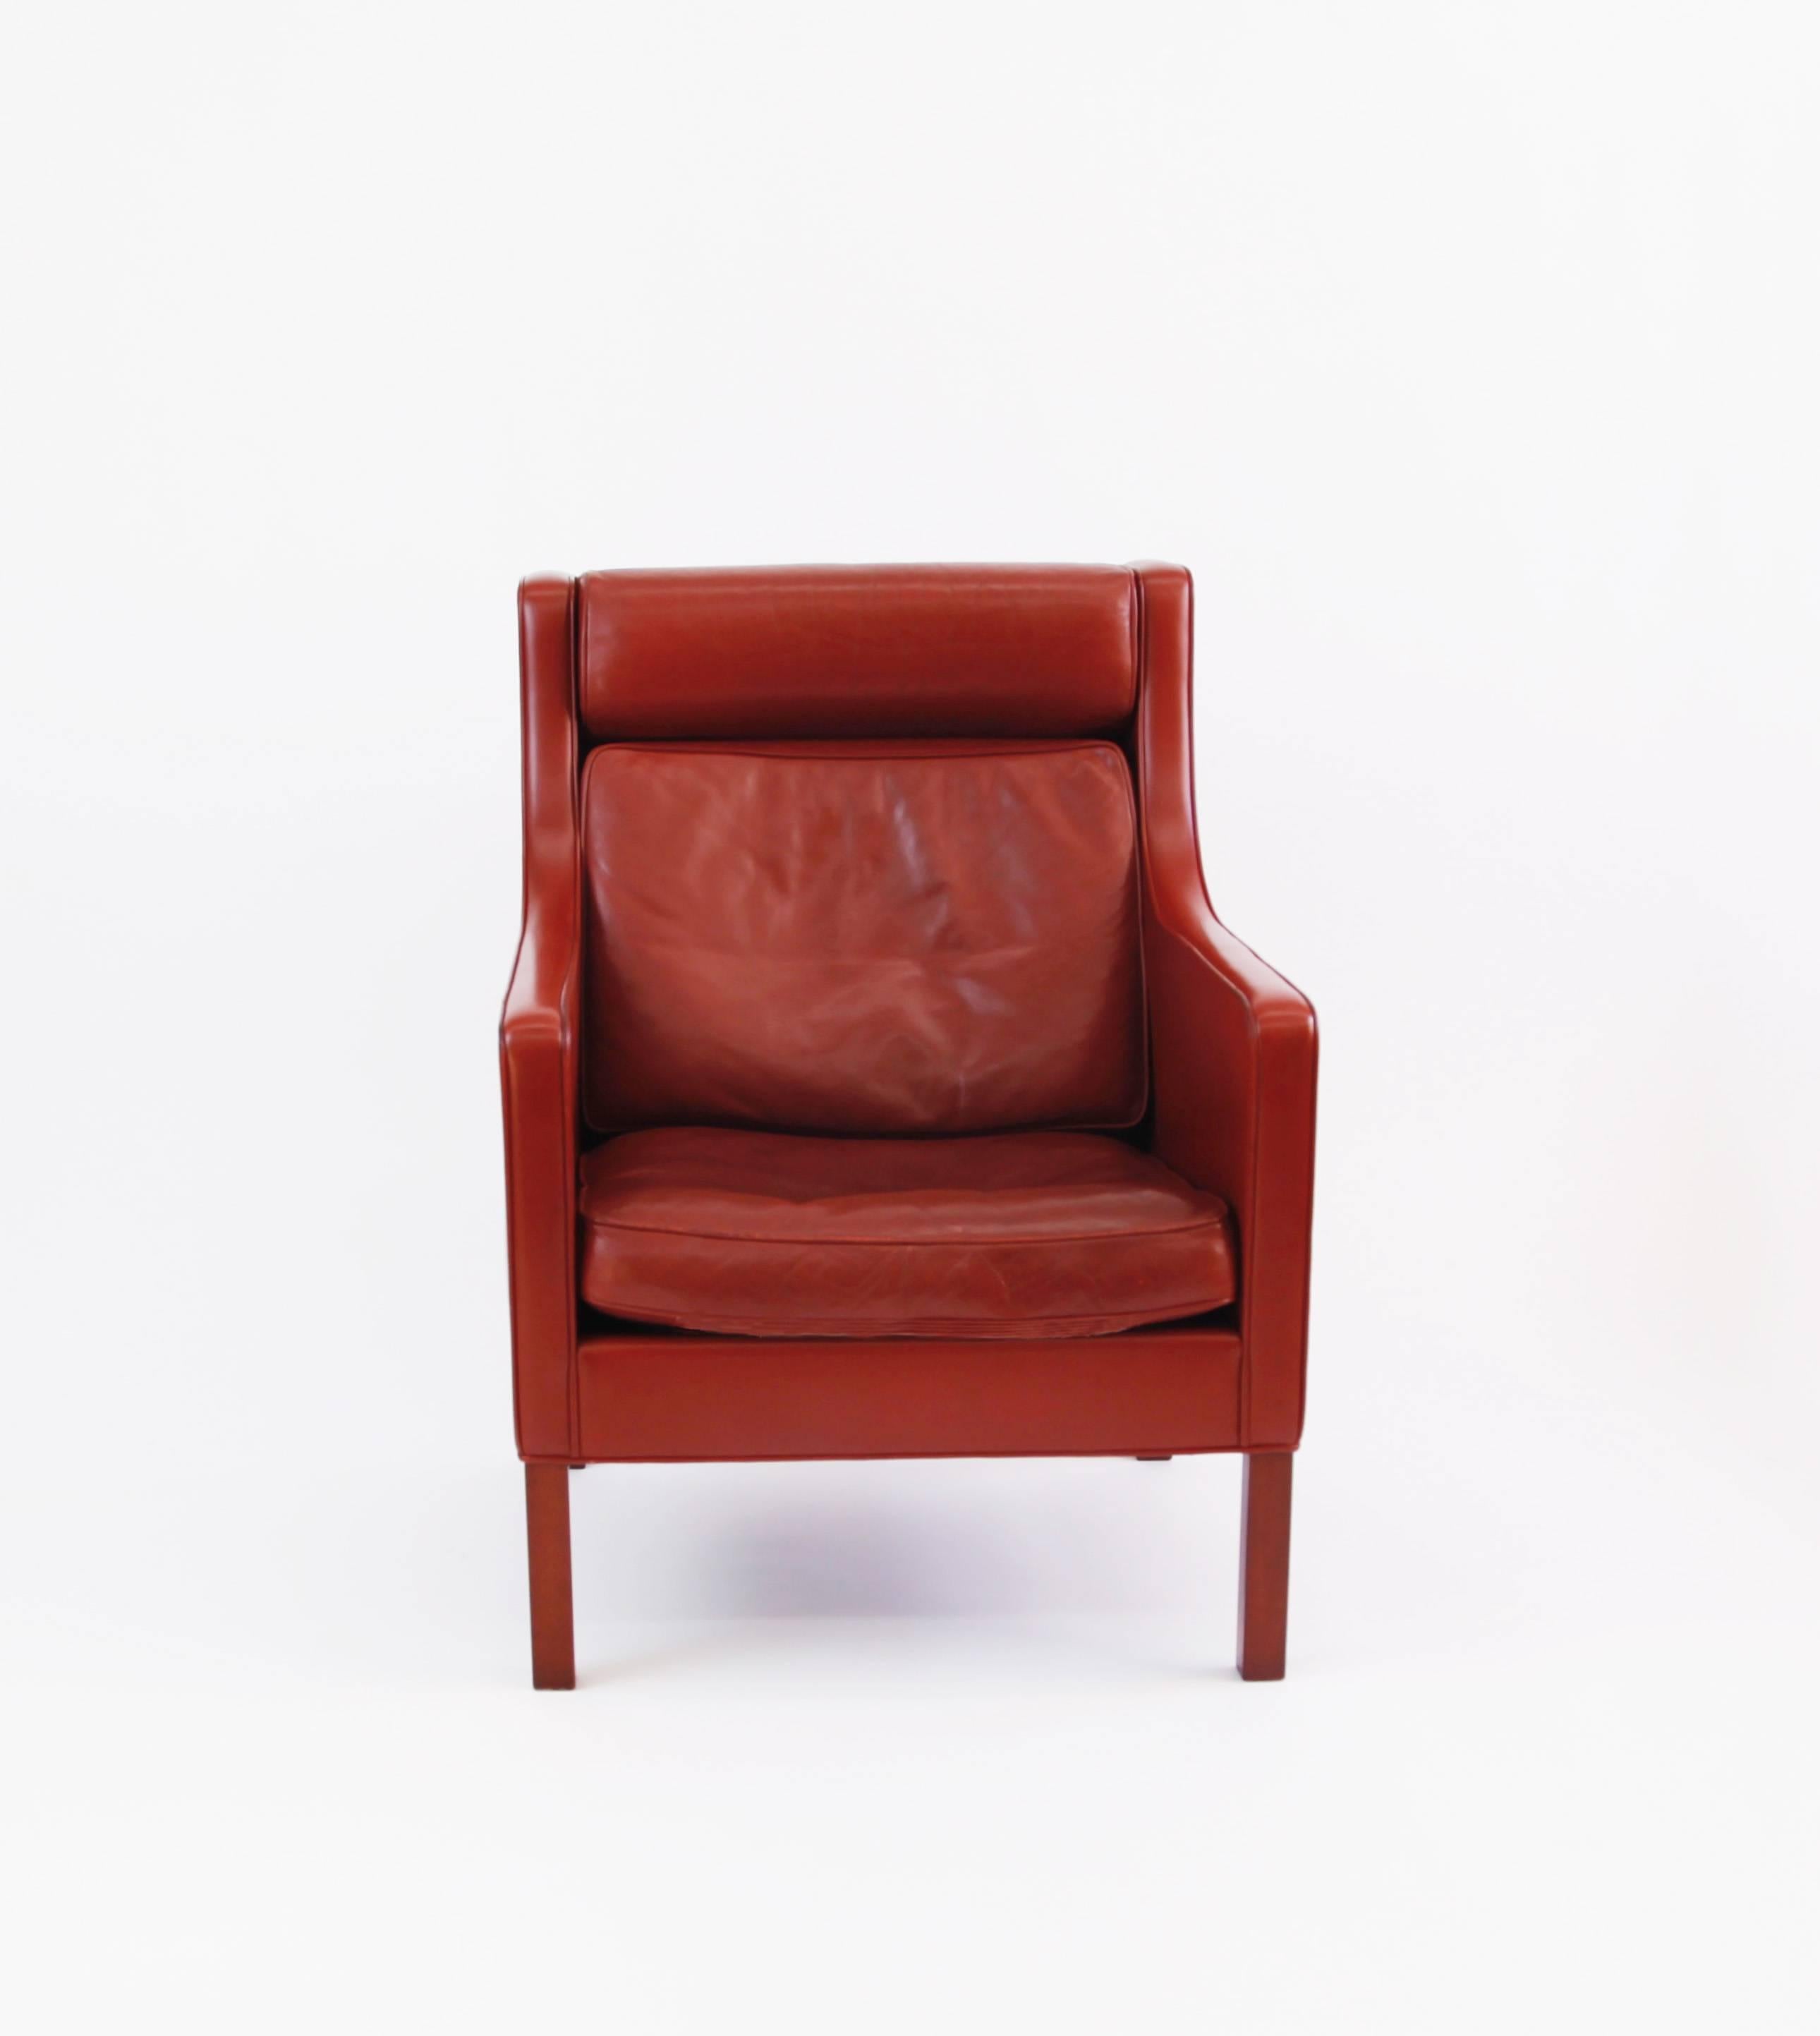 Børge Mogensen's Model 2431 armchair in an oxblood leather with hardwood legs and down seat cushion.

The original leather is nicely worn. One area of surface damage on a small part of the underside of the cushion and seat of the chair, not